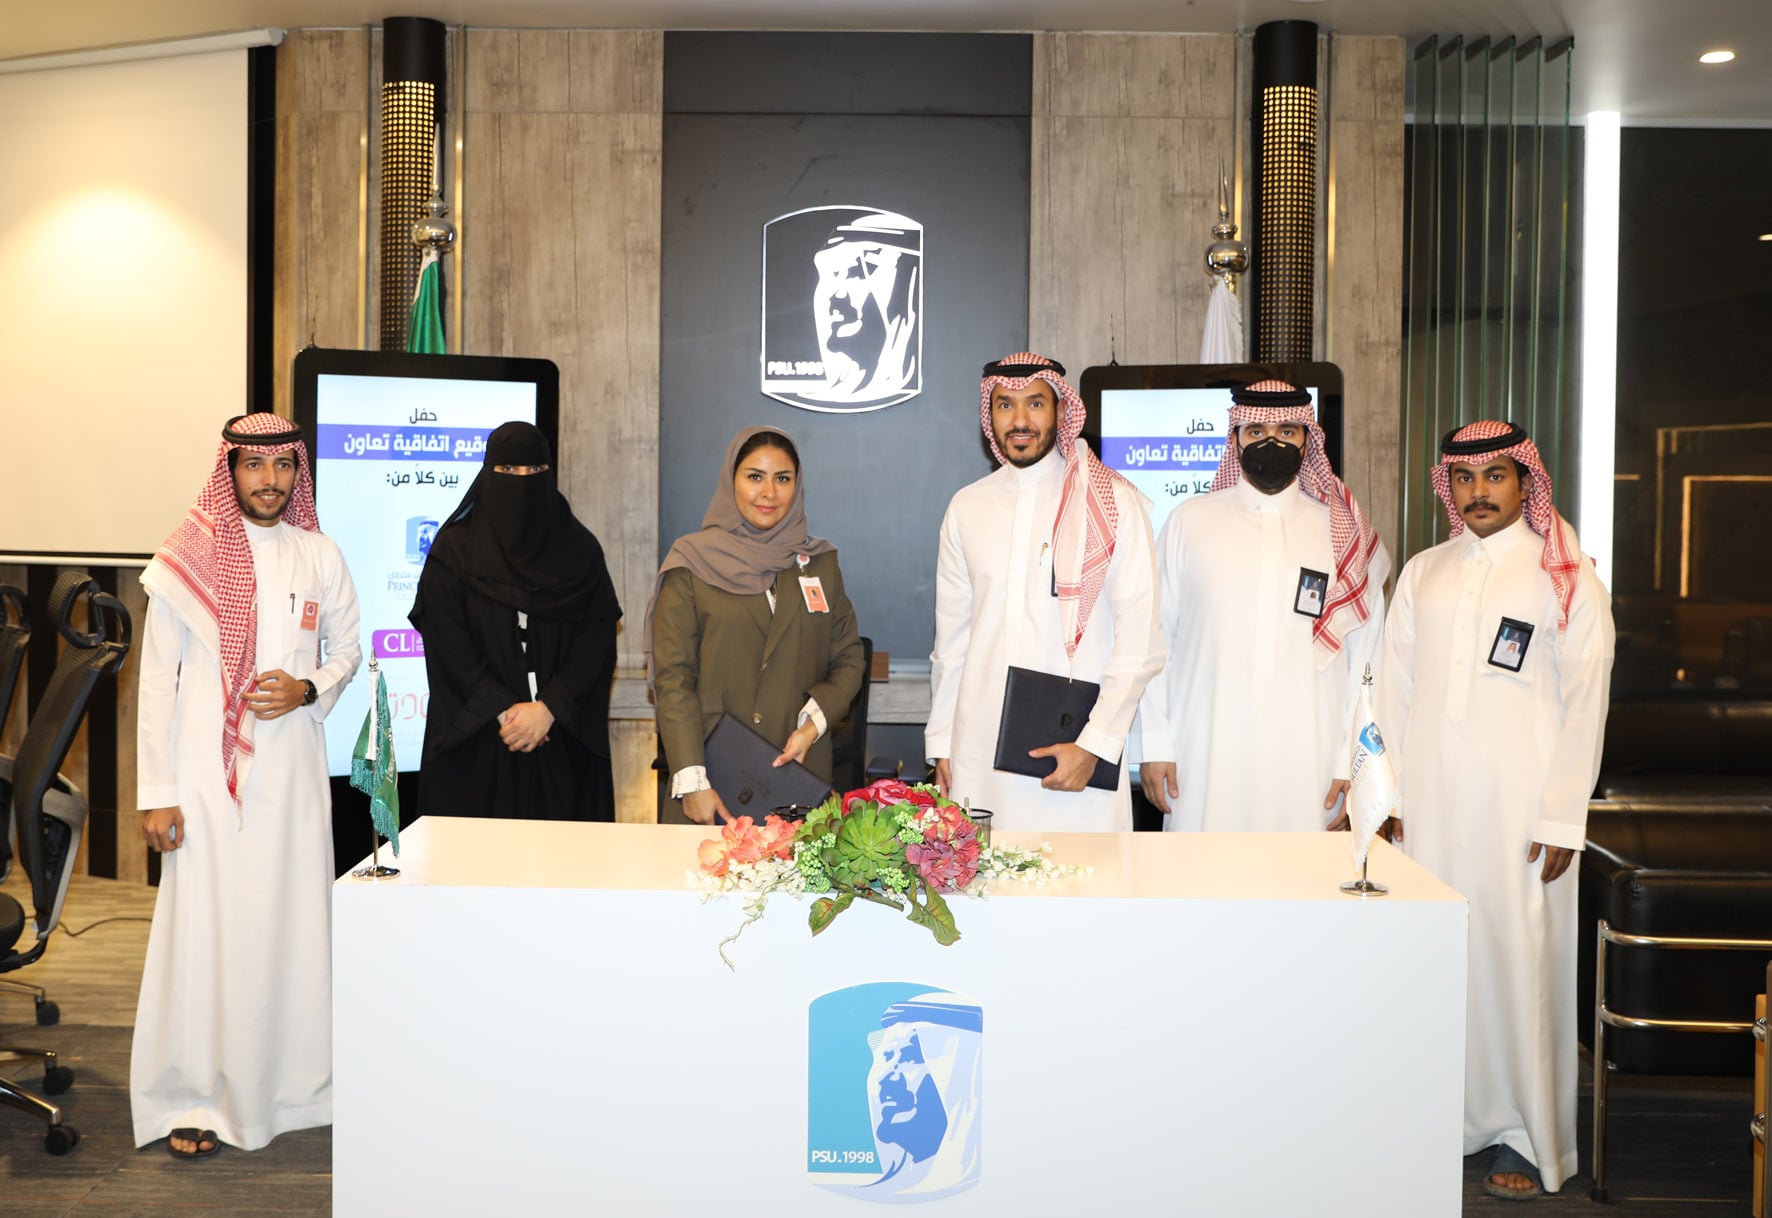 The College of Law Signs a Memorandum of Understanding with Mawaddah Charitable Association